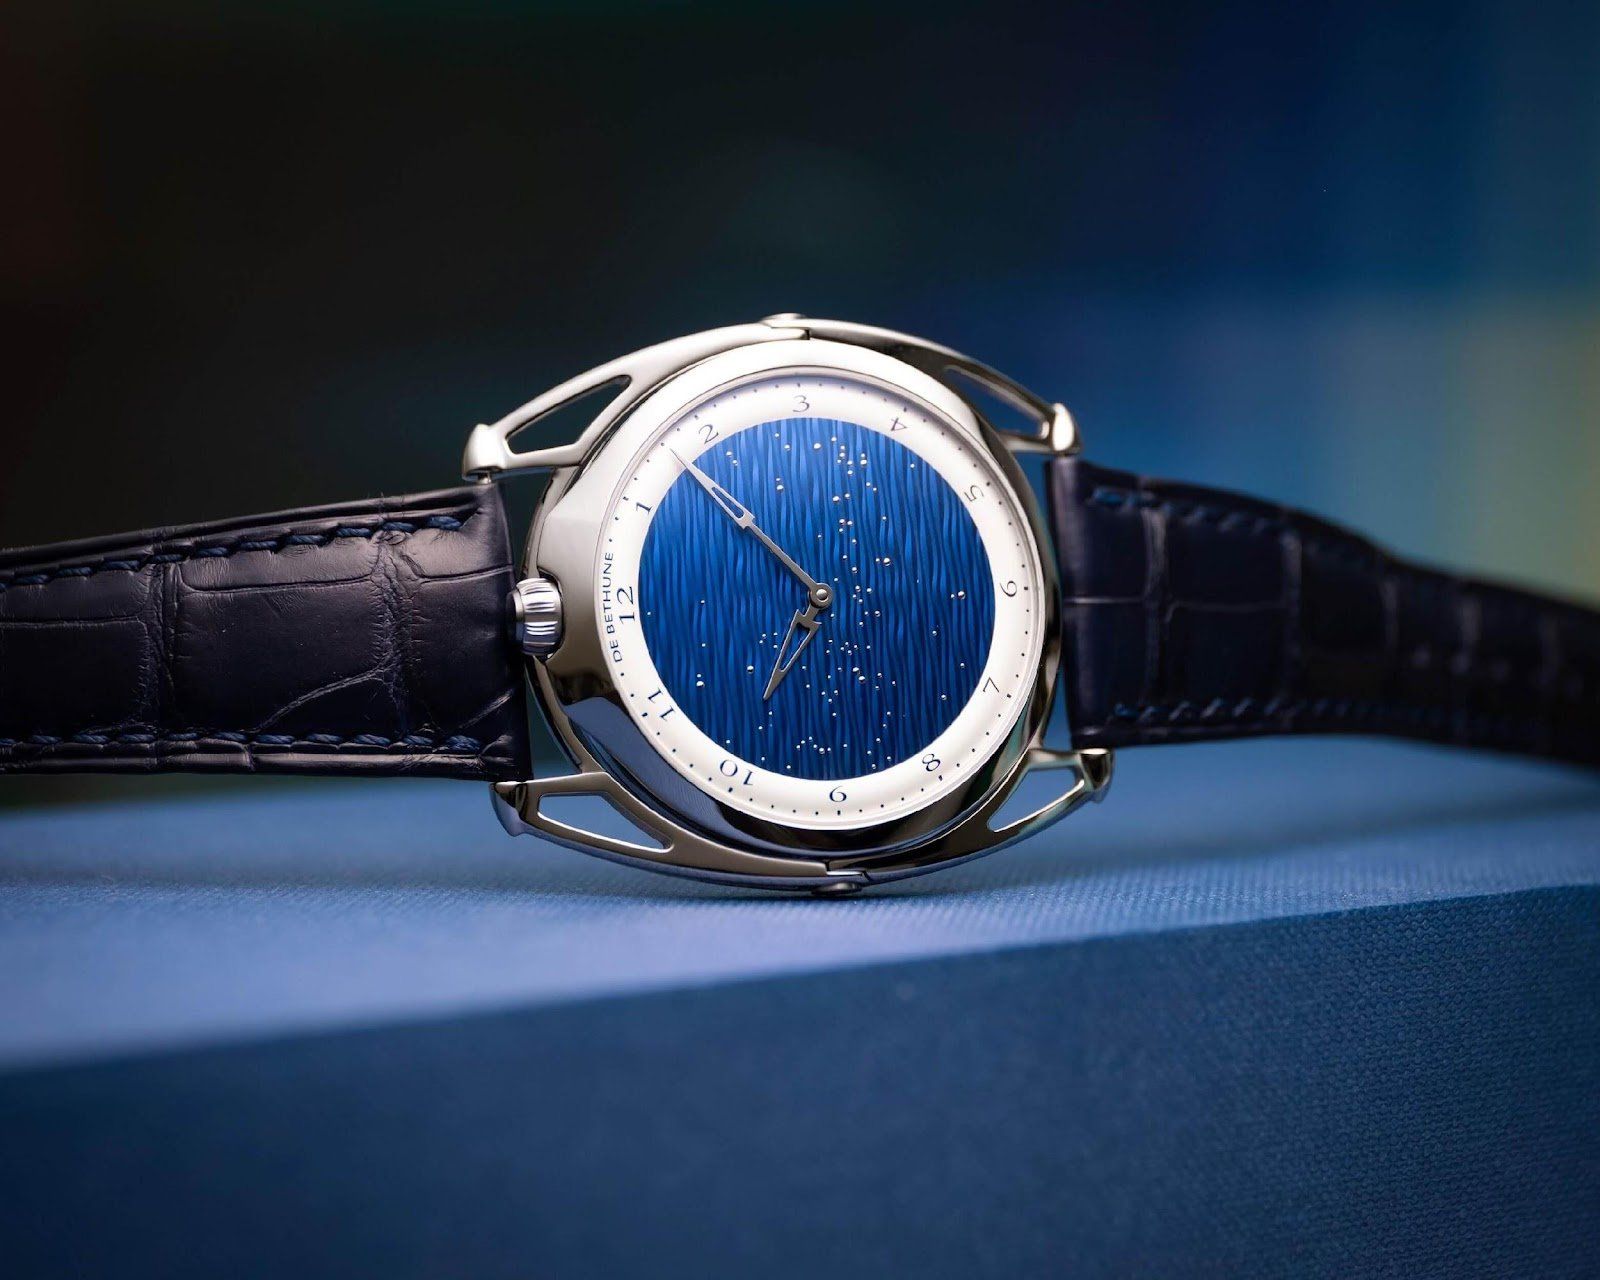 This timepiece has a blued titanium dial featuring a wave reflecting a starry sky